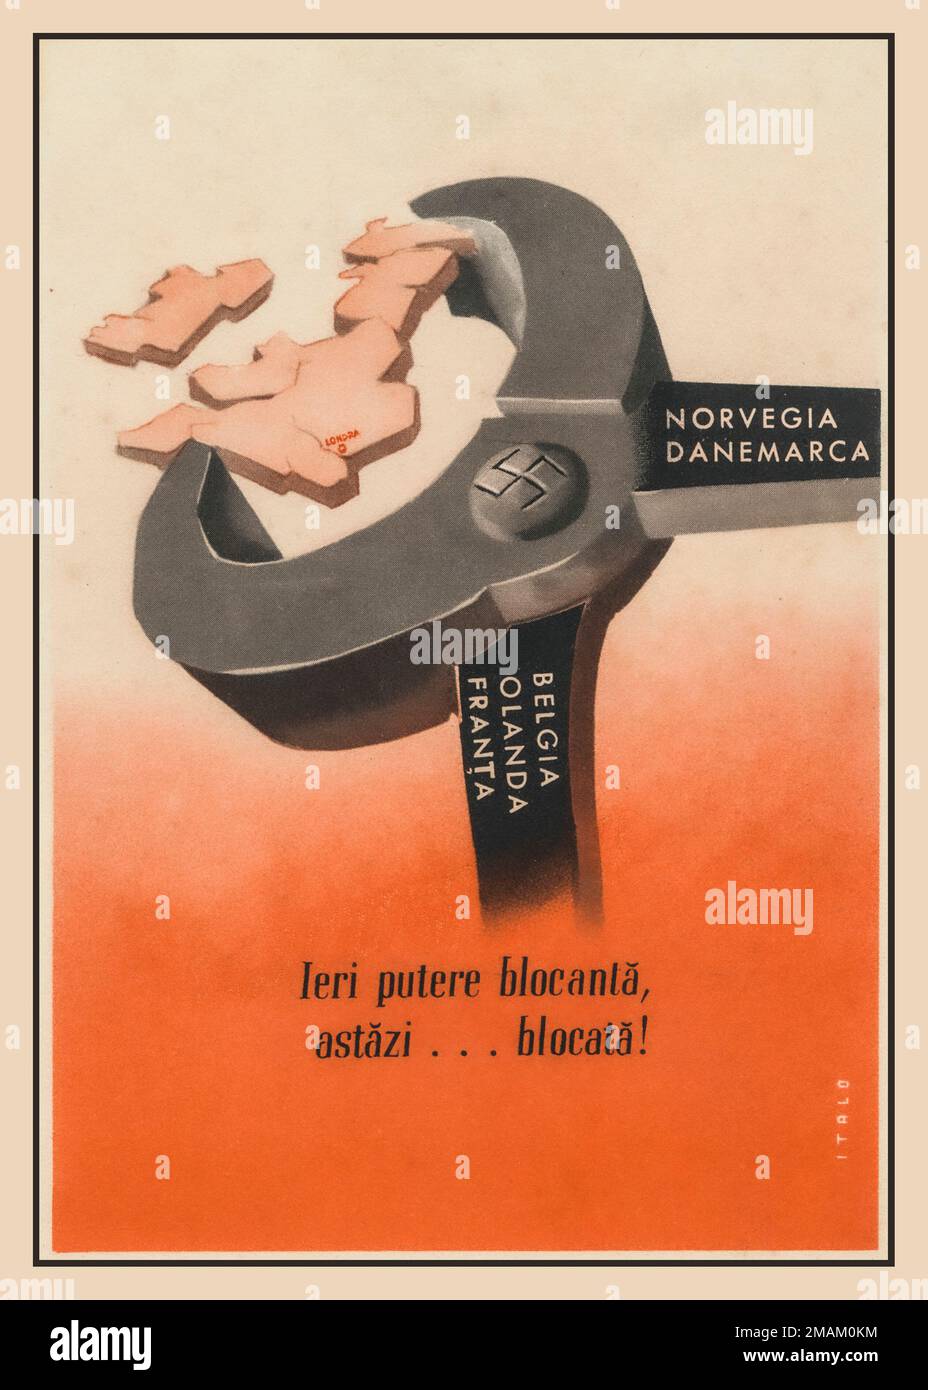 Vintage 1940s Nazi WW2 Propaganda Poster with illustration of Axis Nazi Swastika Pincers crushing a map of Great Britain, with Romanian caption 'Ieri putere blocanta astazi blocata'  'Yesterday the blocking power today blocked !' Axis Nazi forces from Norway, Denmark, Belgium, Holland, France Nazi sympathisers. Stock Photo